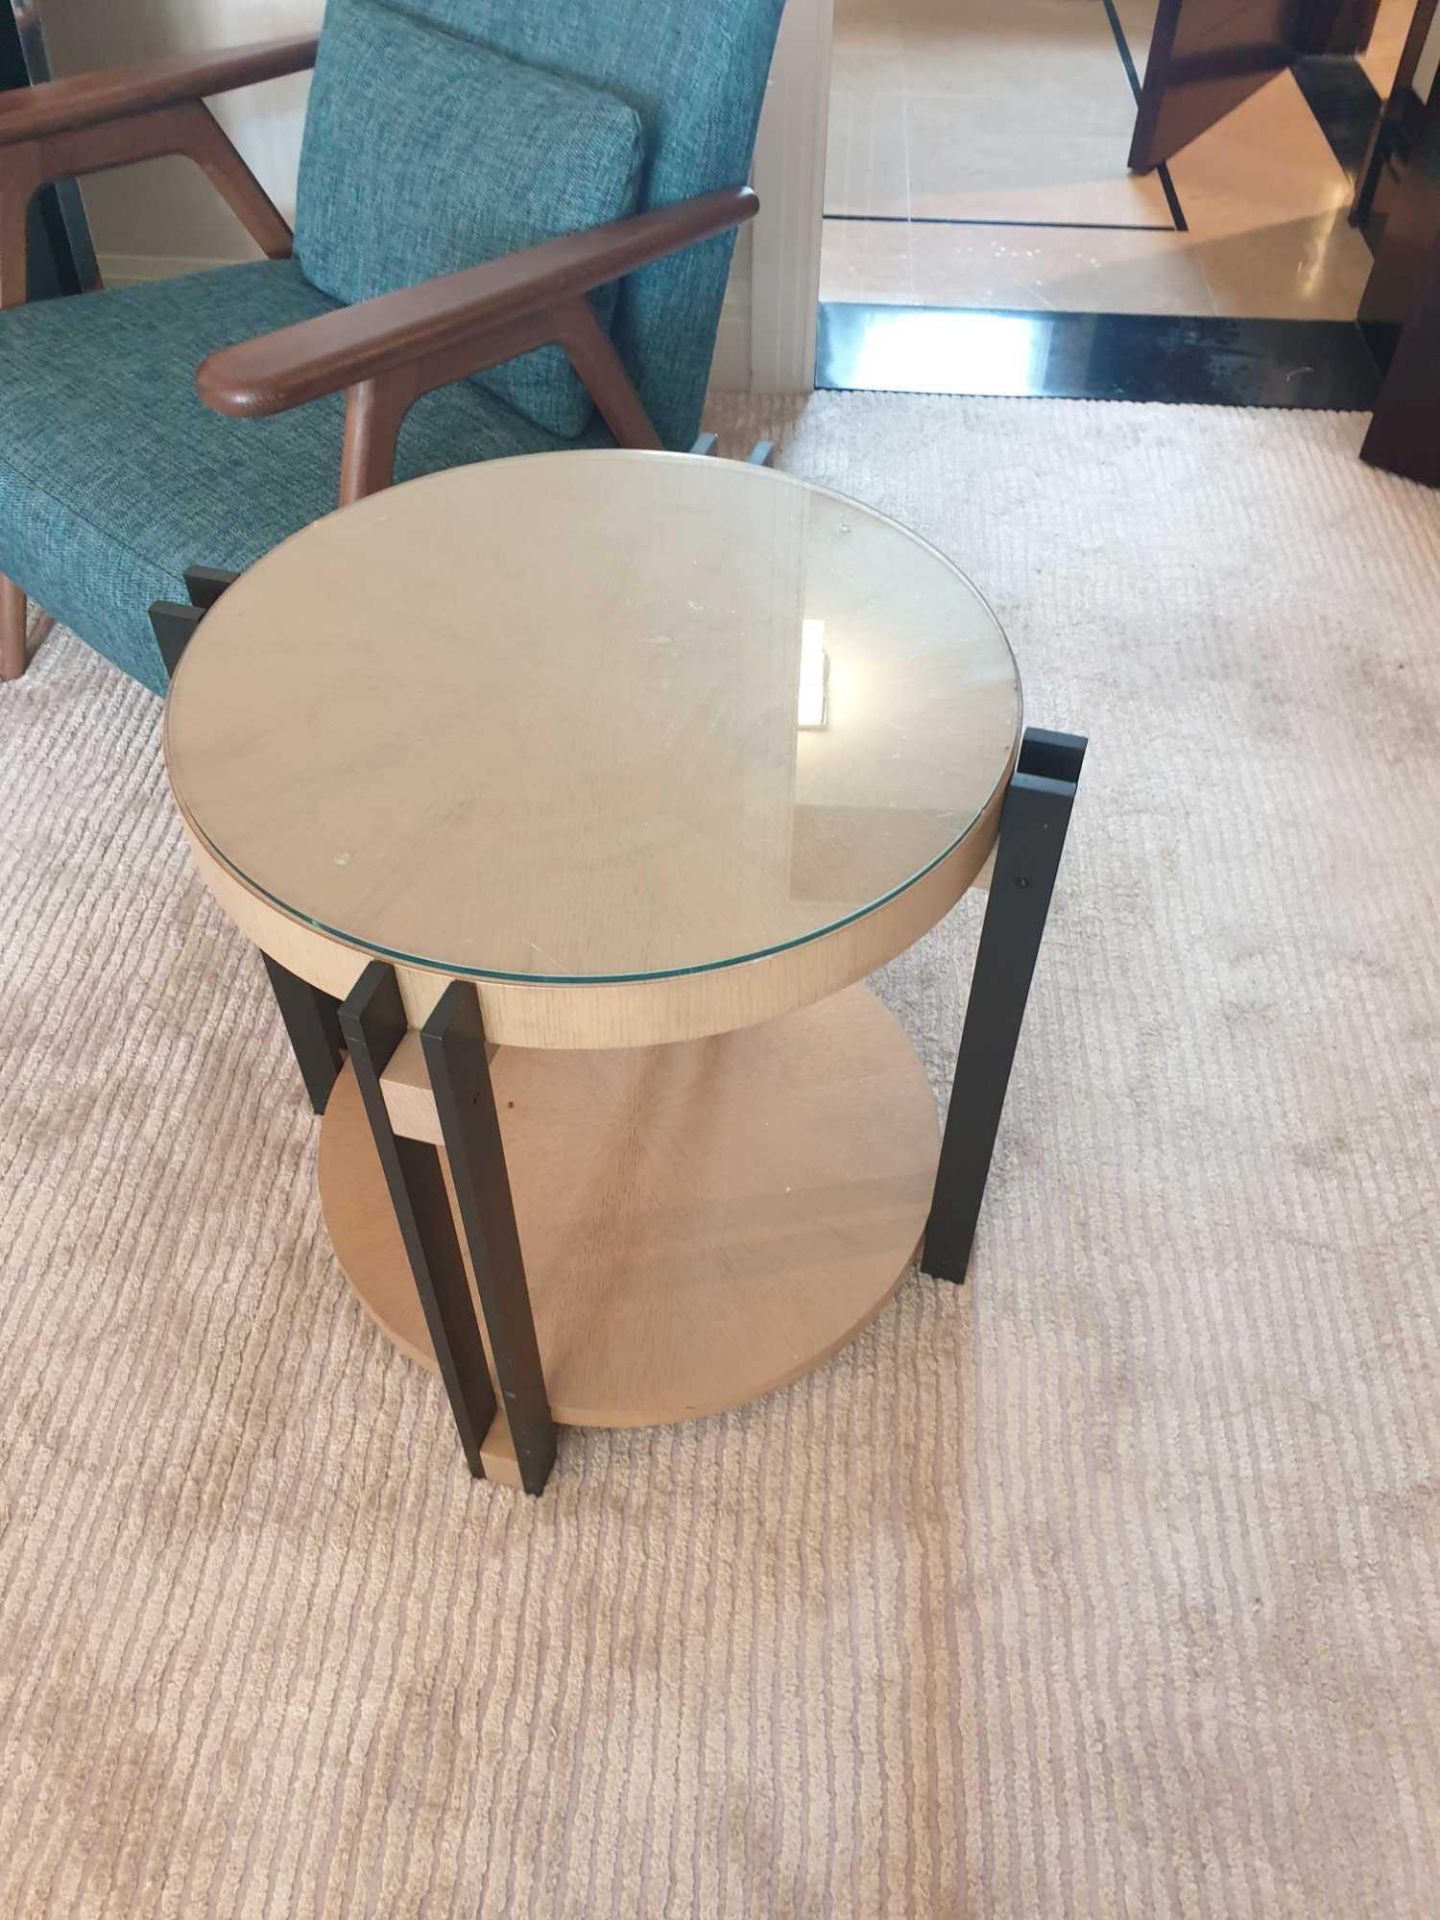 A Contemporary Side Table With Glass Top 61 x 57cm - Image 3 of 6